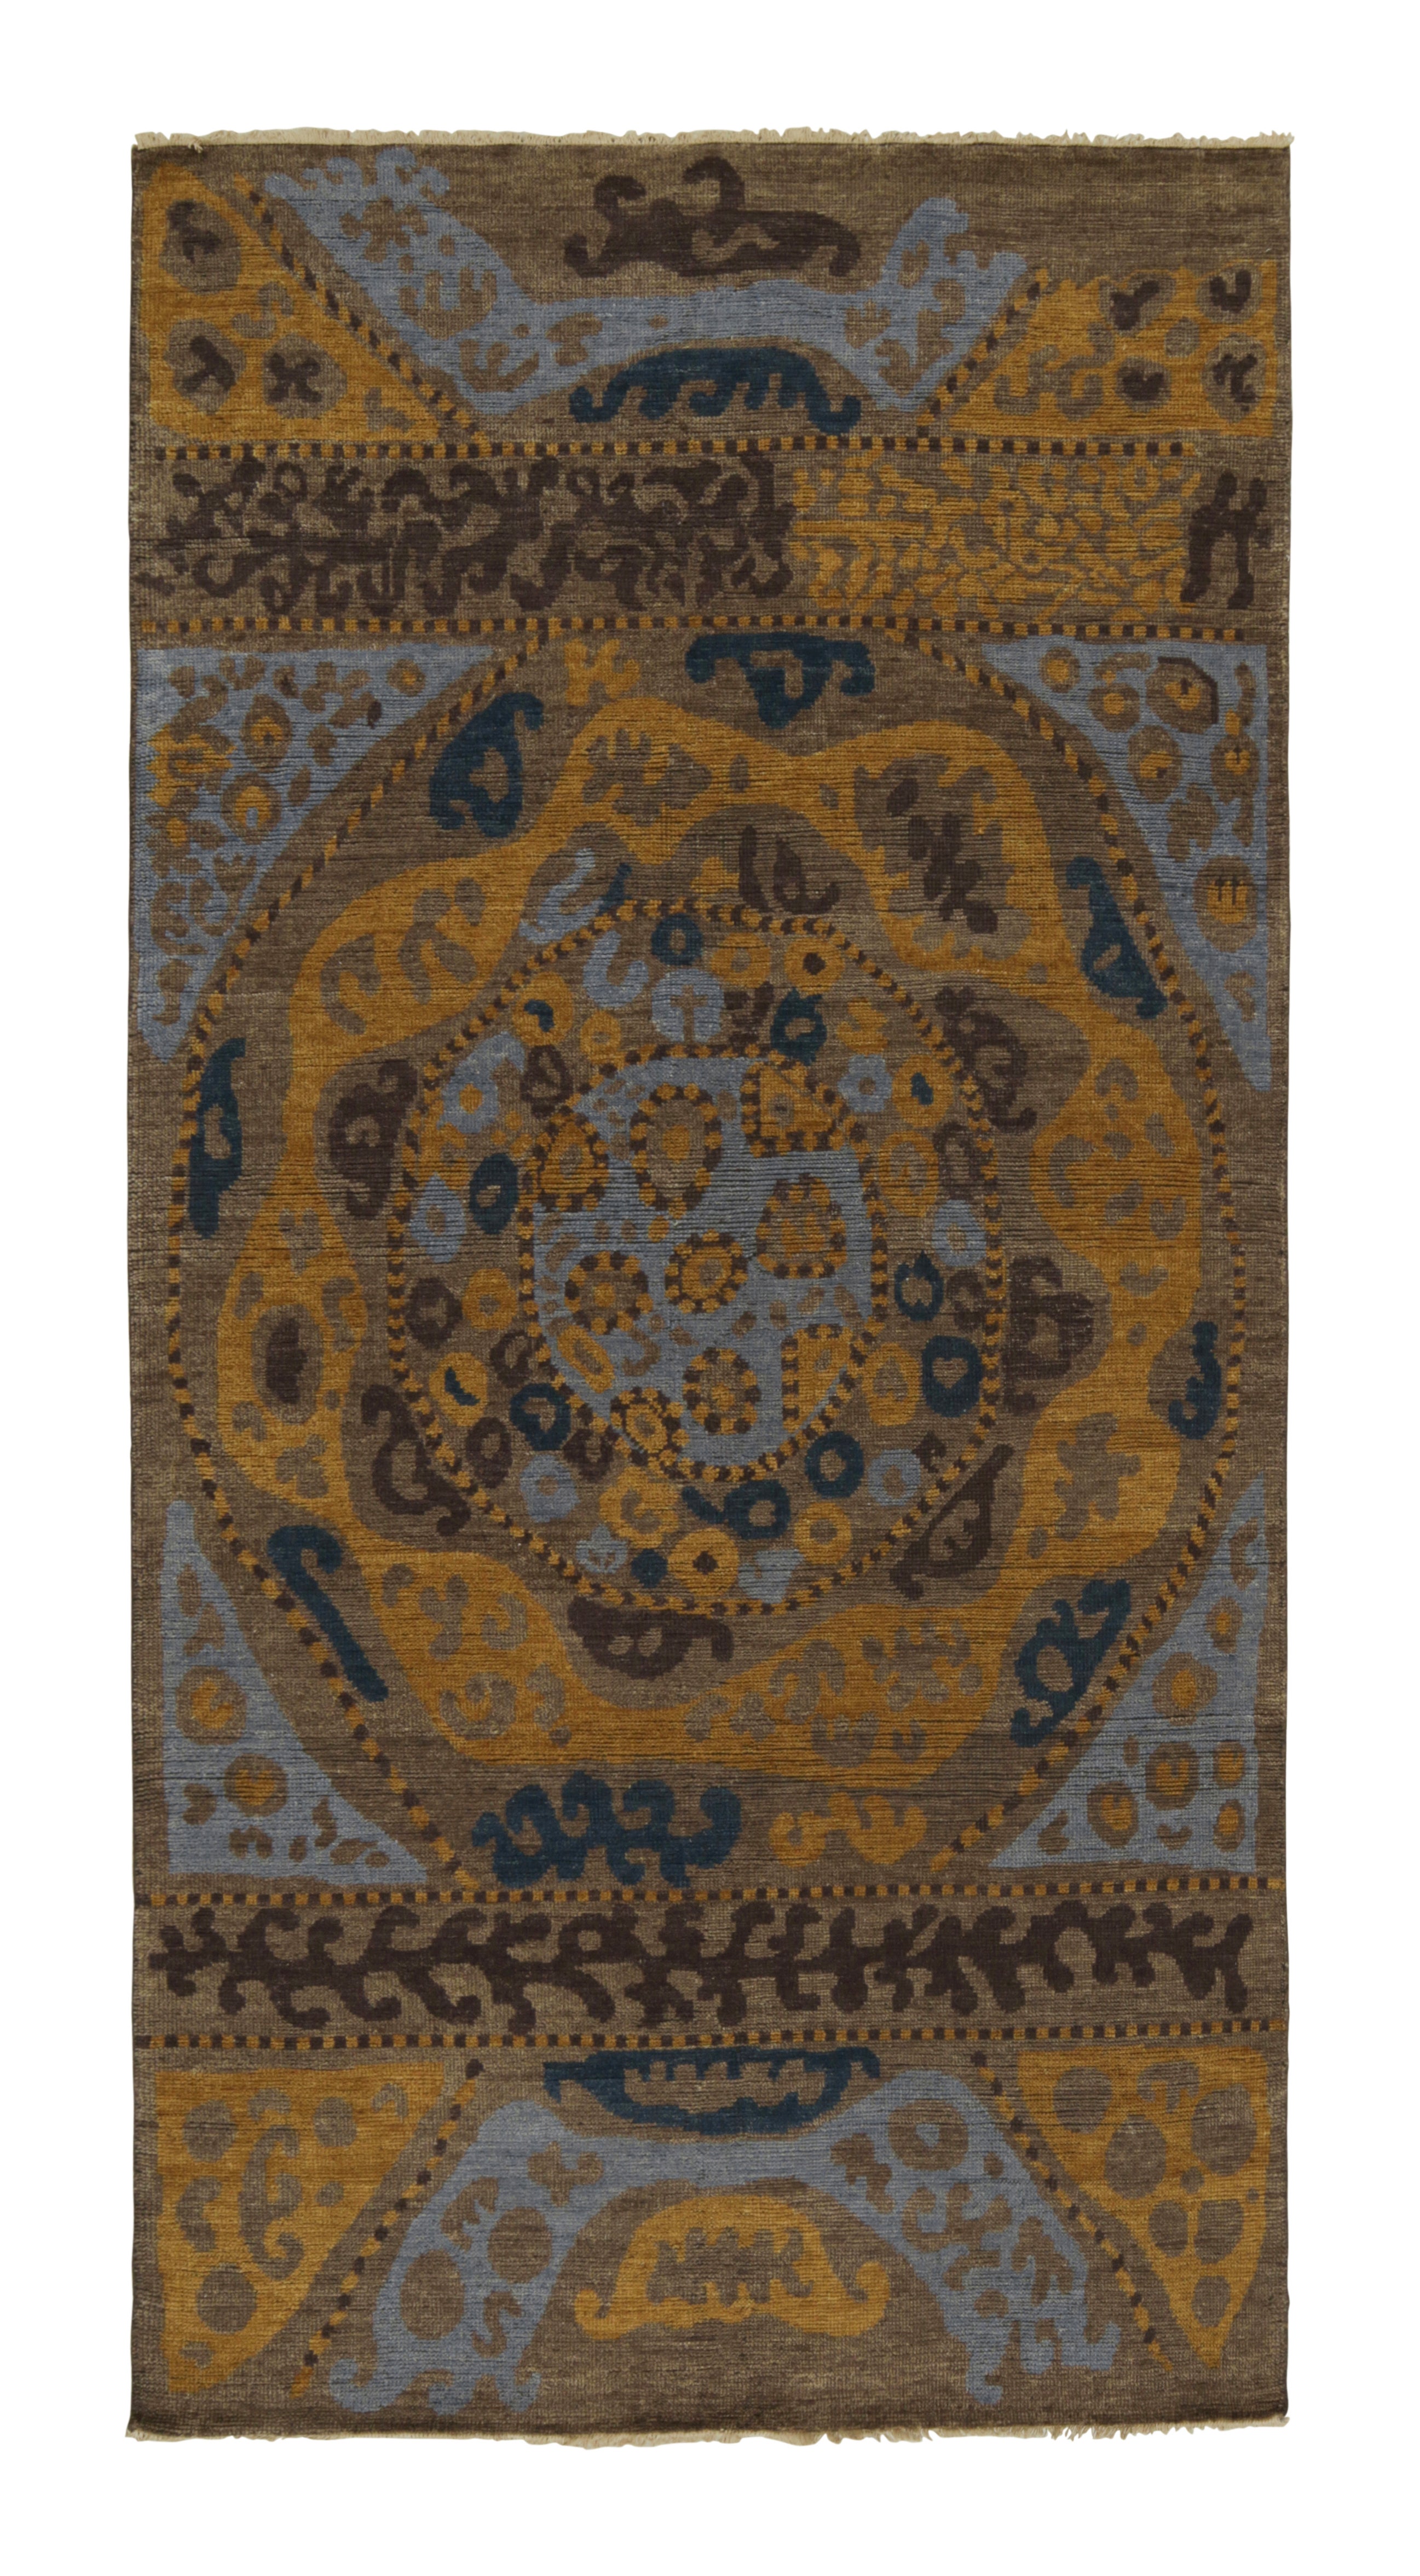 Rug & Kilim’s Tribal Inspired Rug in Blue, Brown, Gold Geometric Patterns For Sale